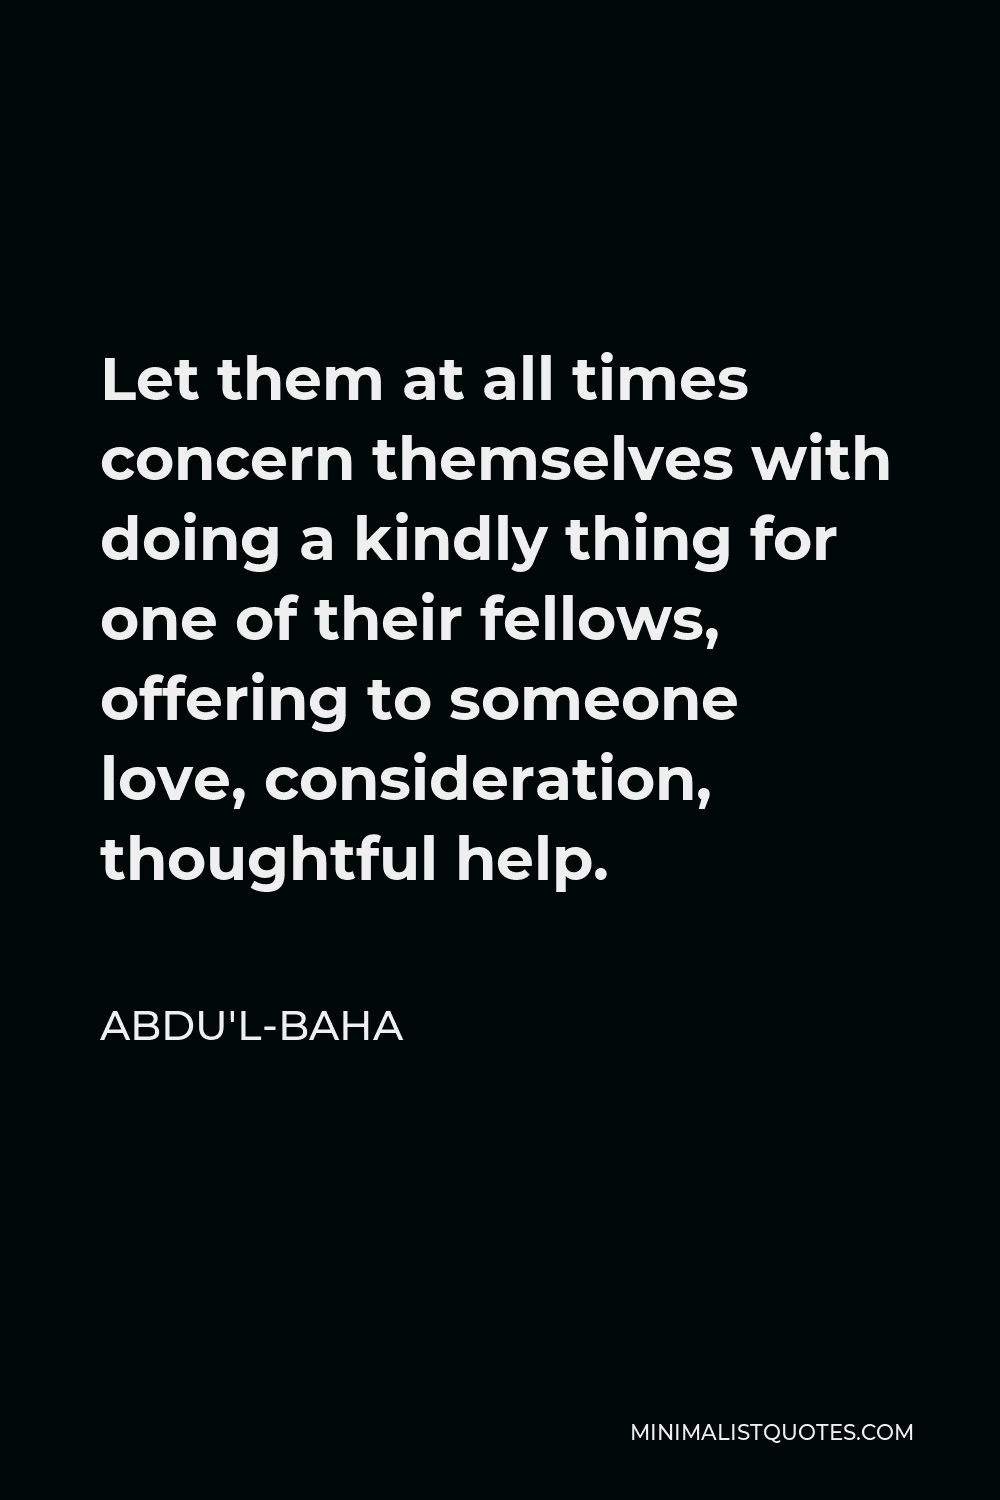 Abdu'l-Baha Quote - Let them at all times concern themselves with doing a kindly thing for one of their fellows, offering to someone love, consideration, thoughtful help.